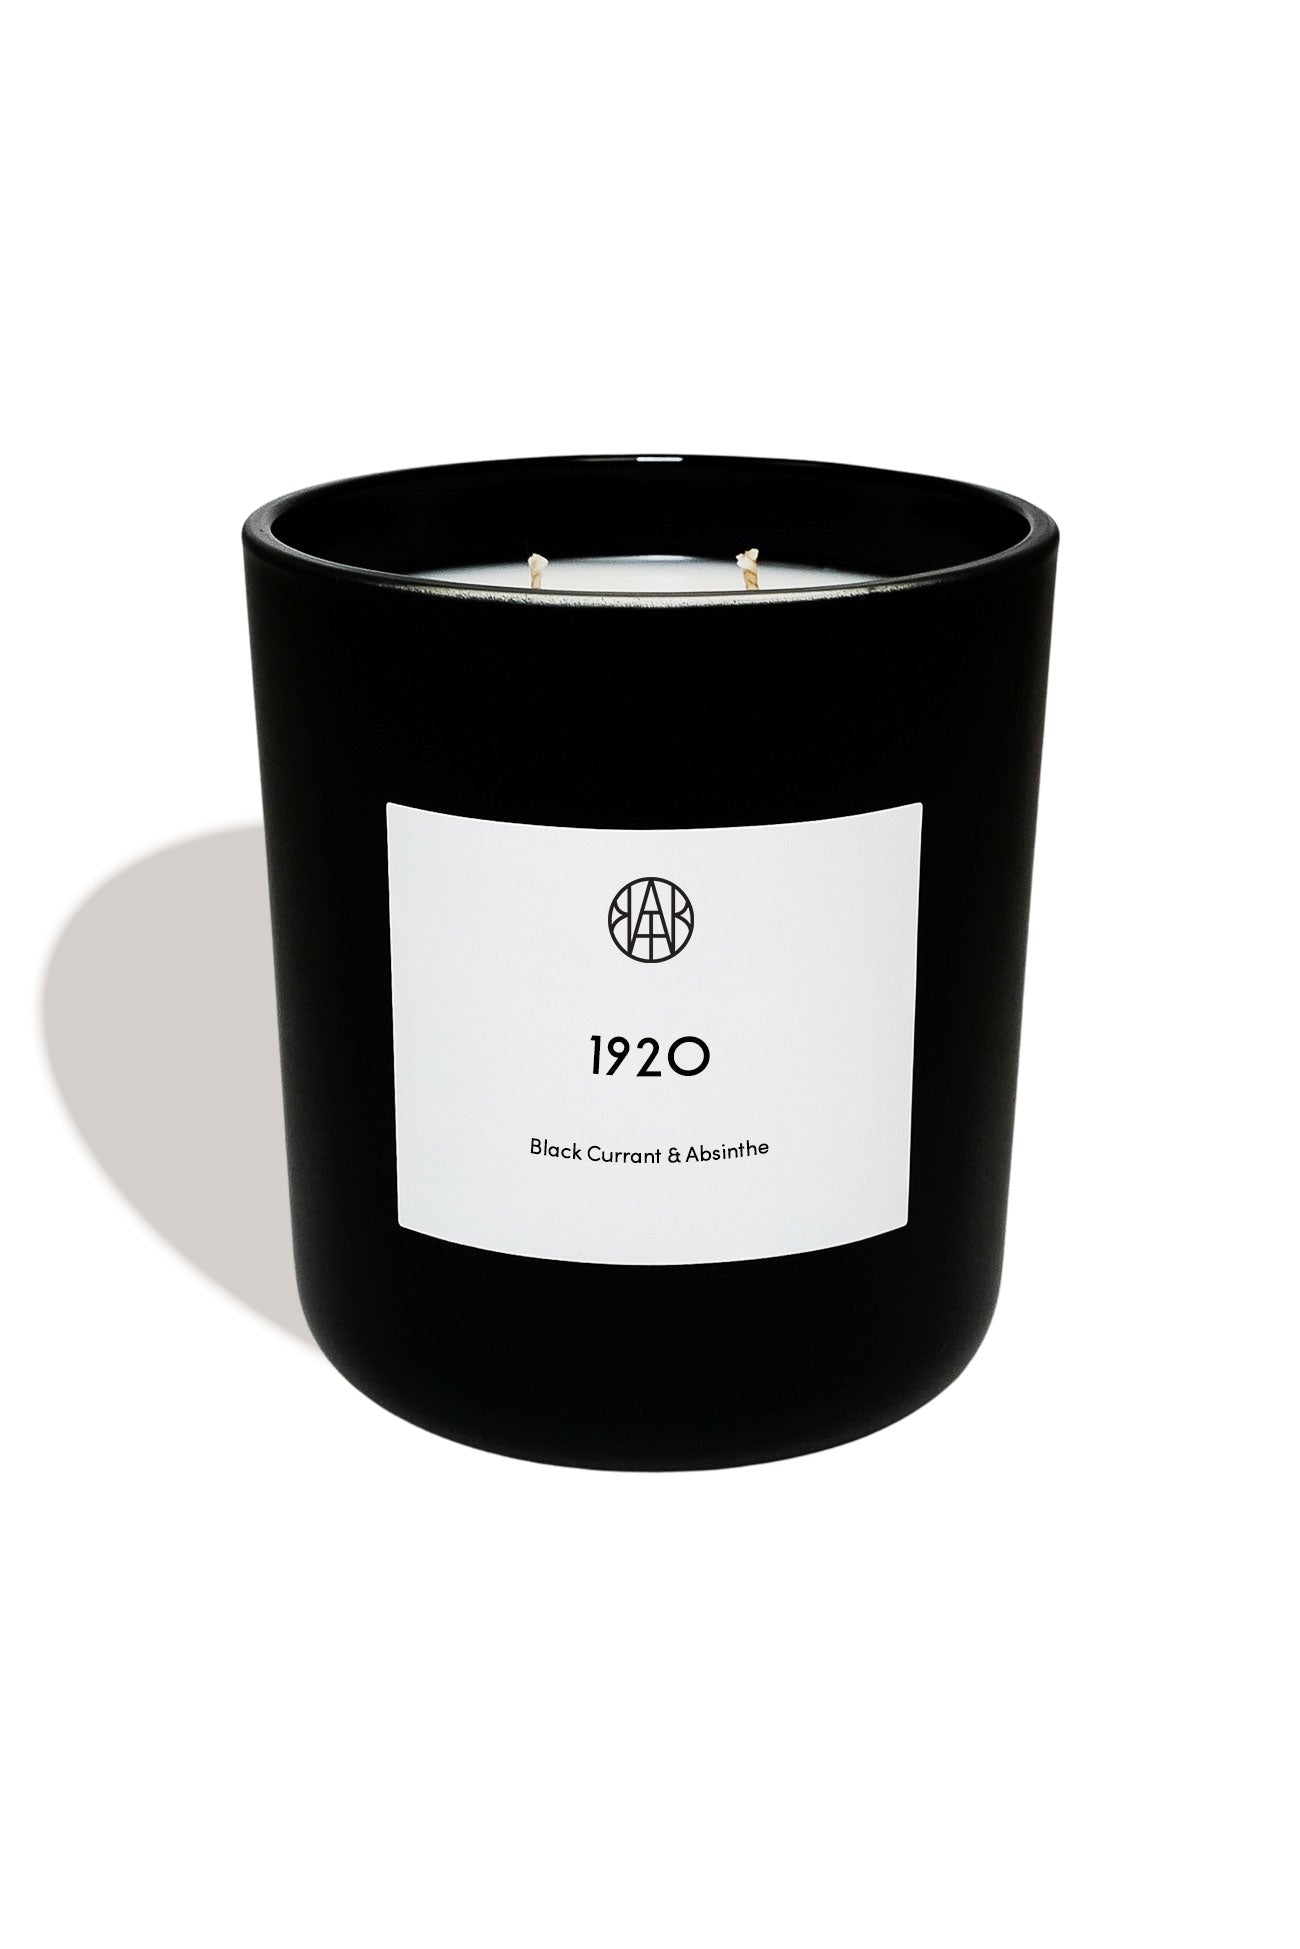 1920 - Deluxe Candle - AEMBR - Clean Luxury Candles, Wax Melts & Laundry Care